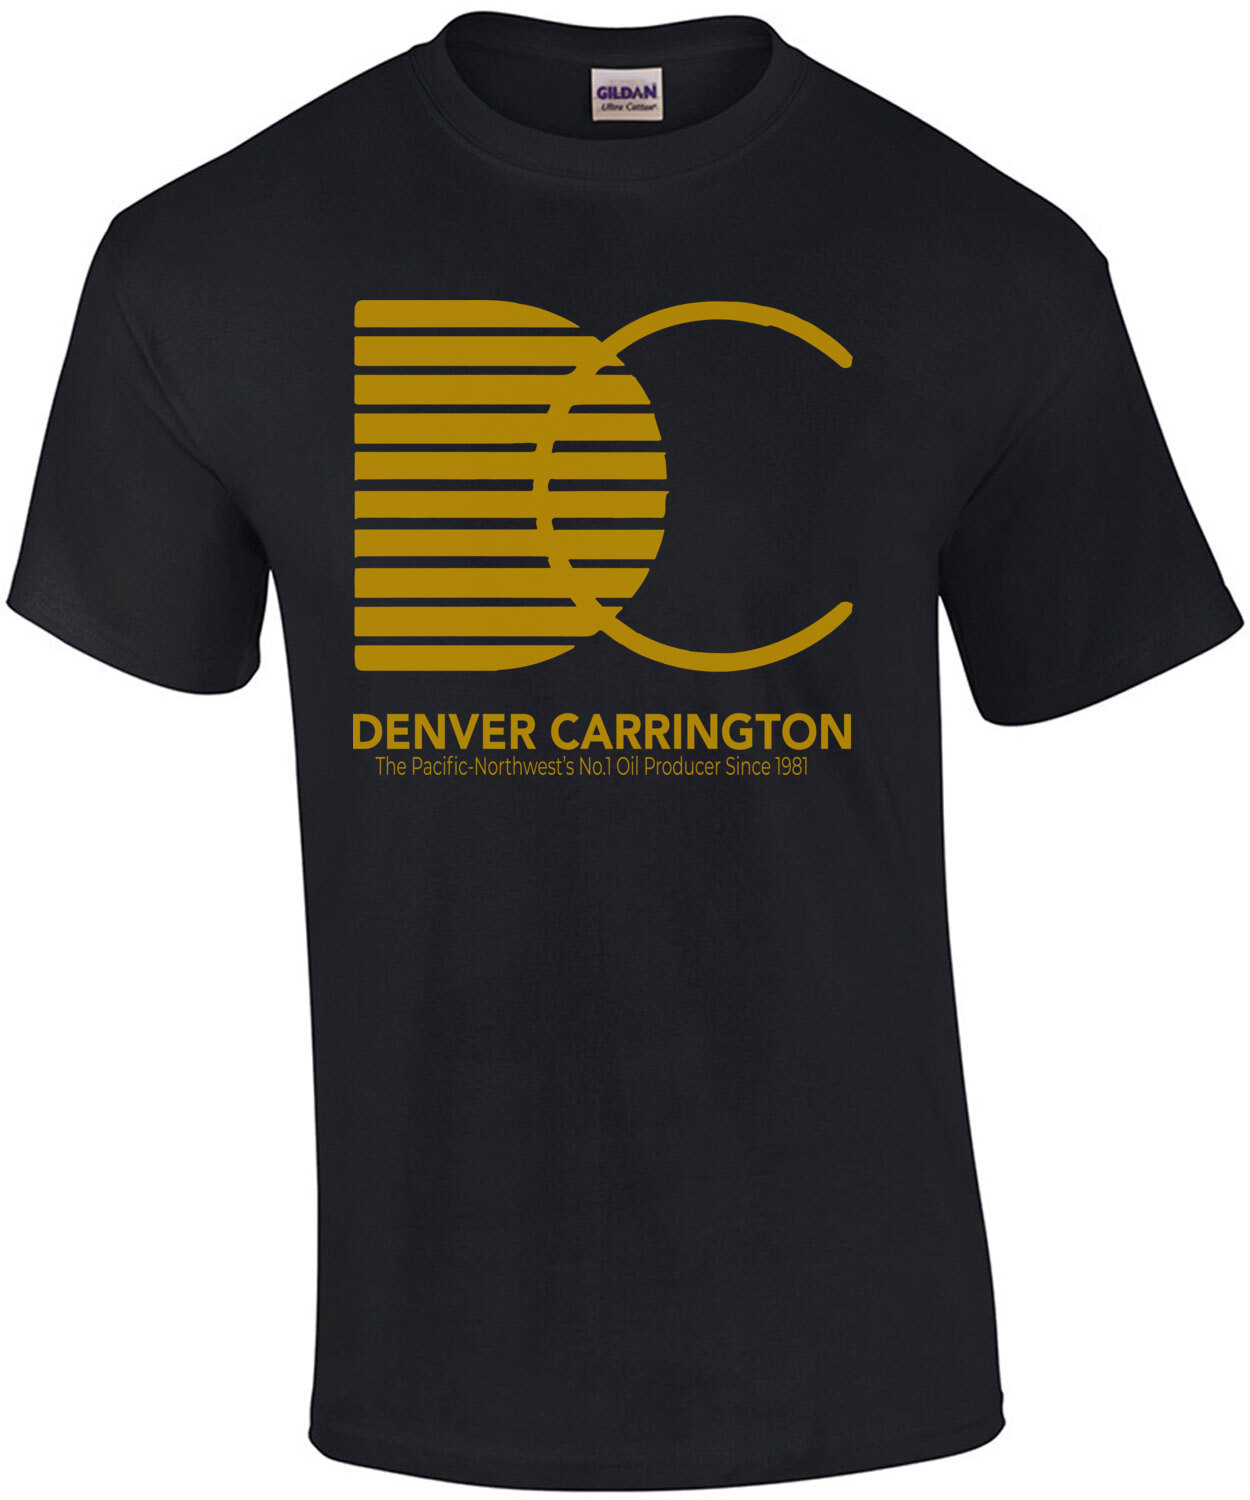 Denver Carrington - The Pacific Northwest's No.1 Oil Producer since 1981 - Dynasty 80's T-Shirt